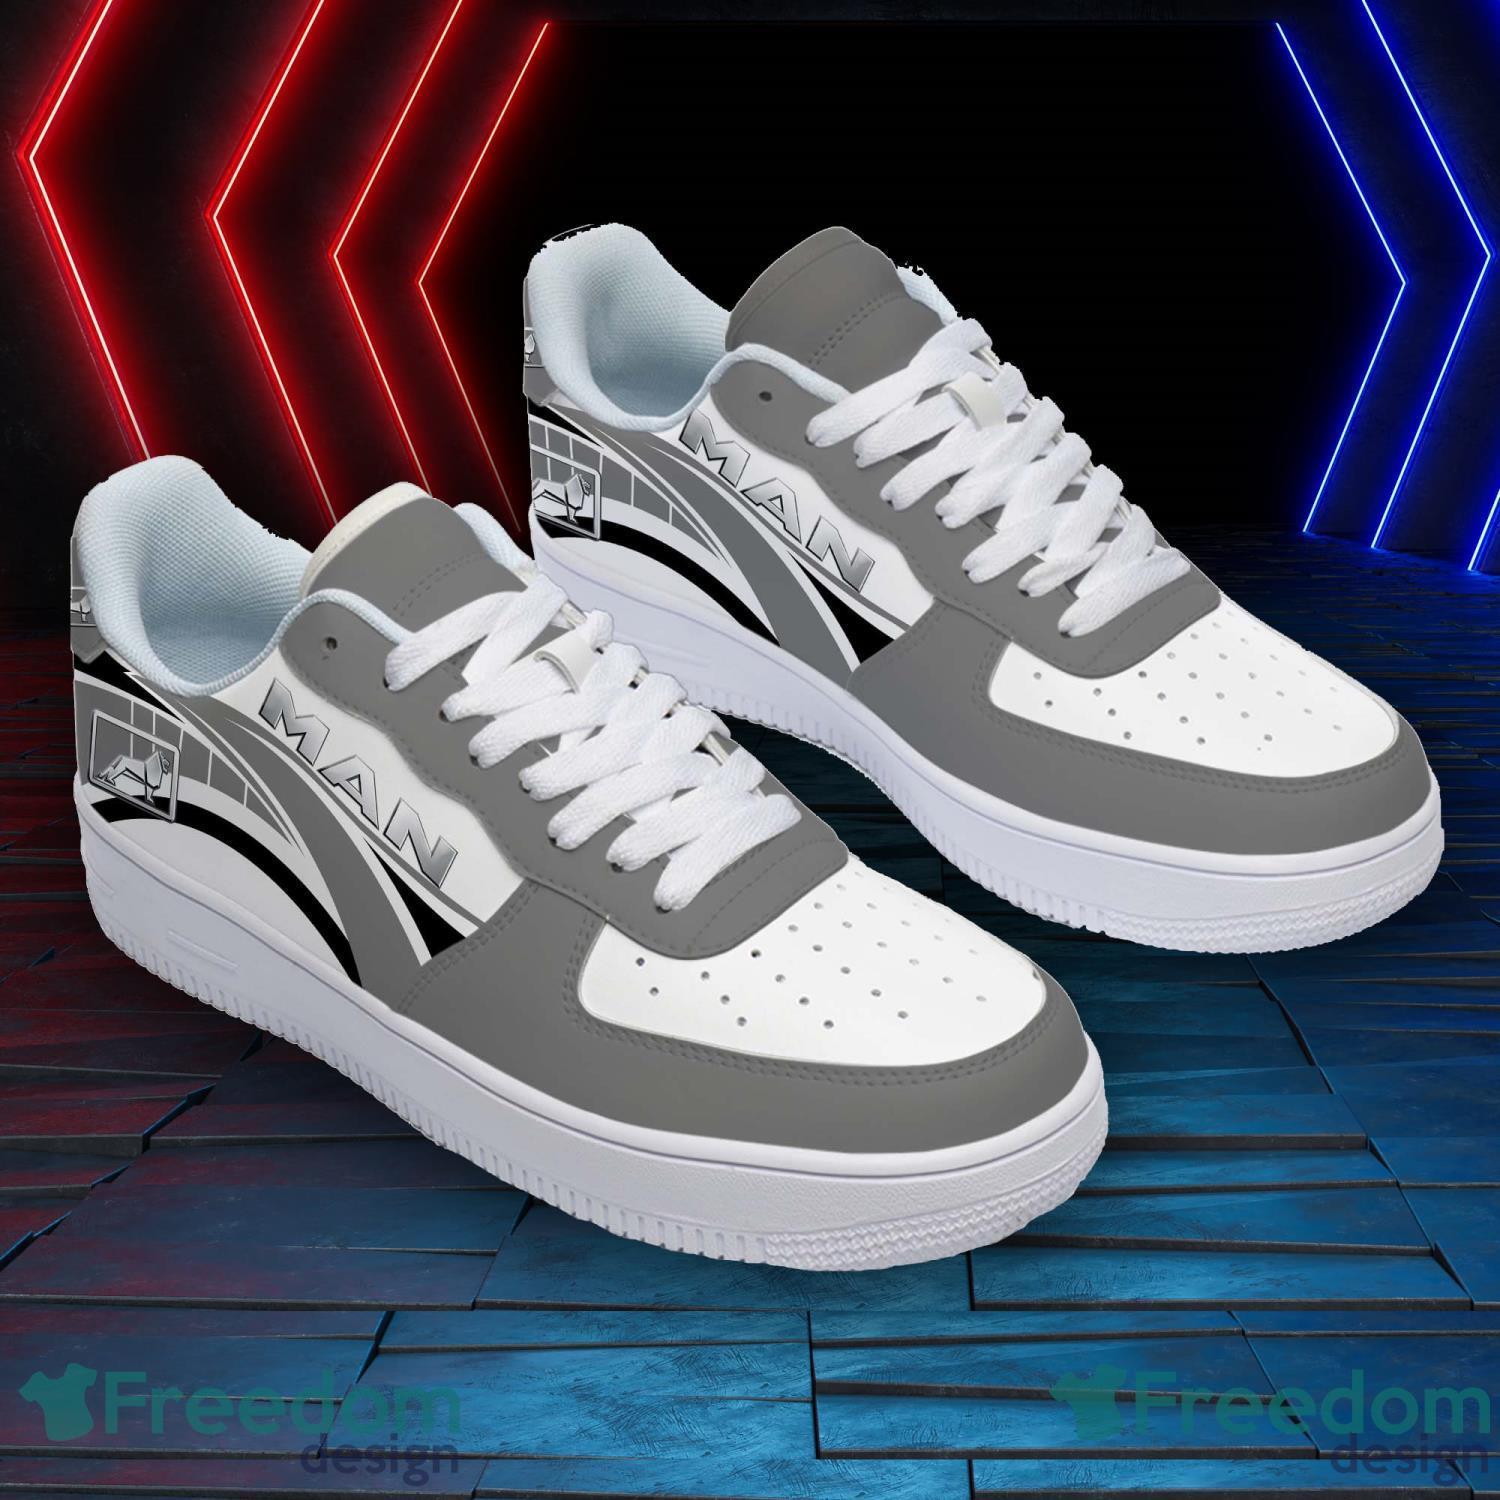 Vespa Air Force Shoes Men and Women Sneakers Sport Gift - Freedomdesign